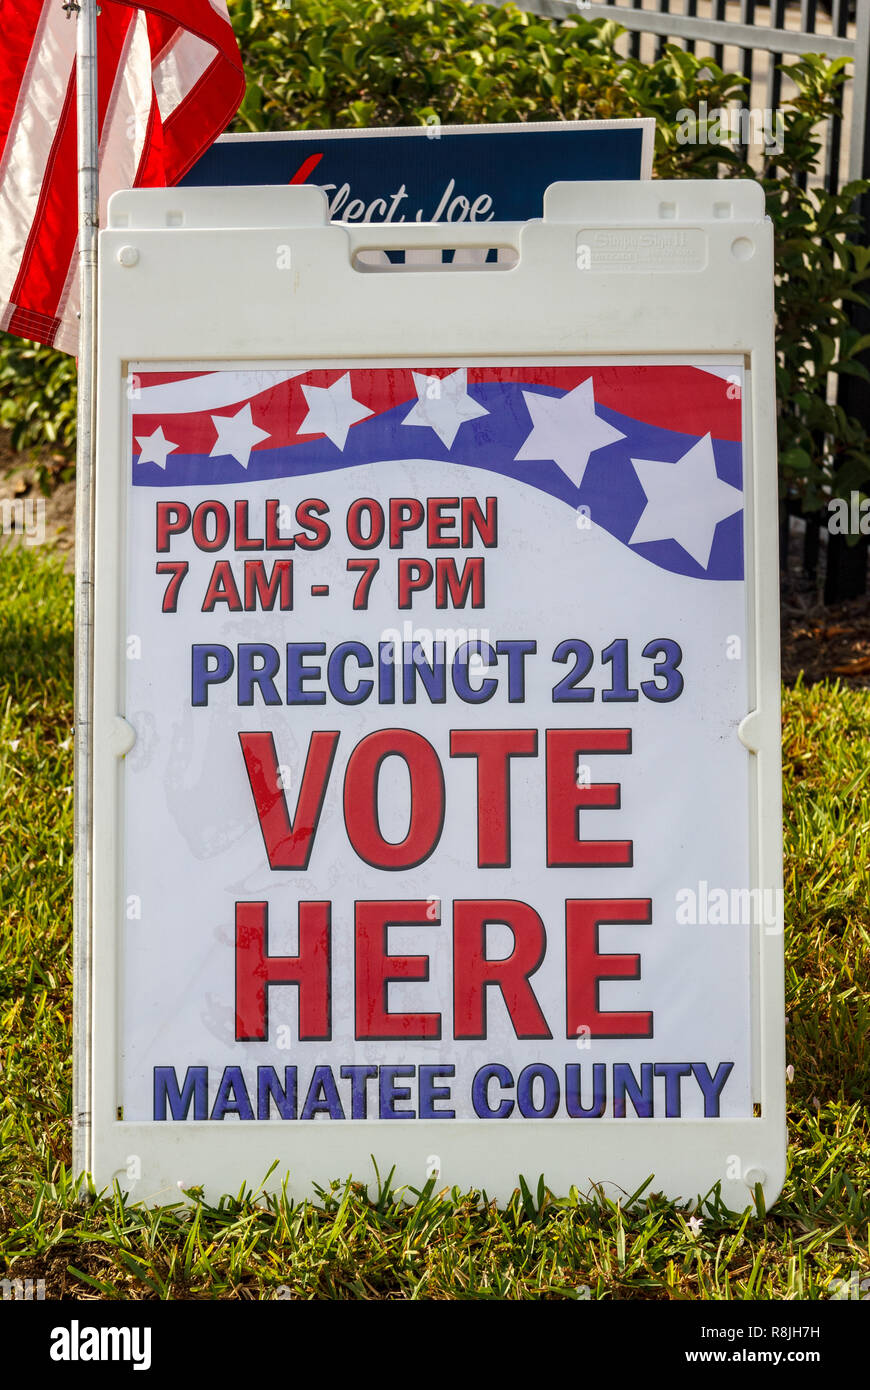 Voting information sign at public polling place Stock Photo